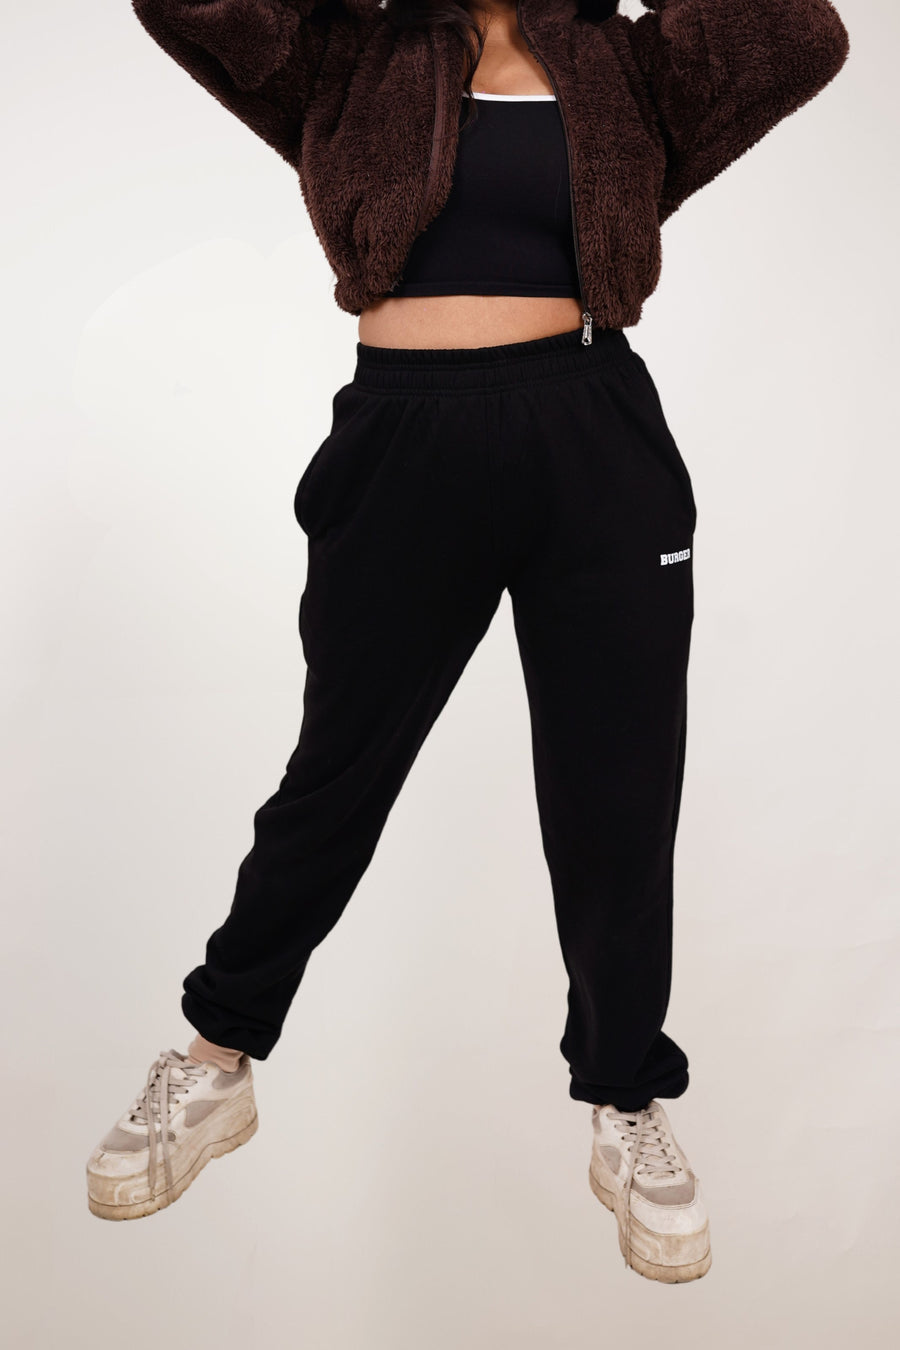 Gathered Jogger/Tracks (Black) For Men And Women